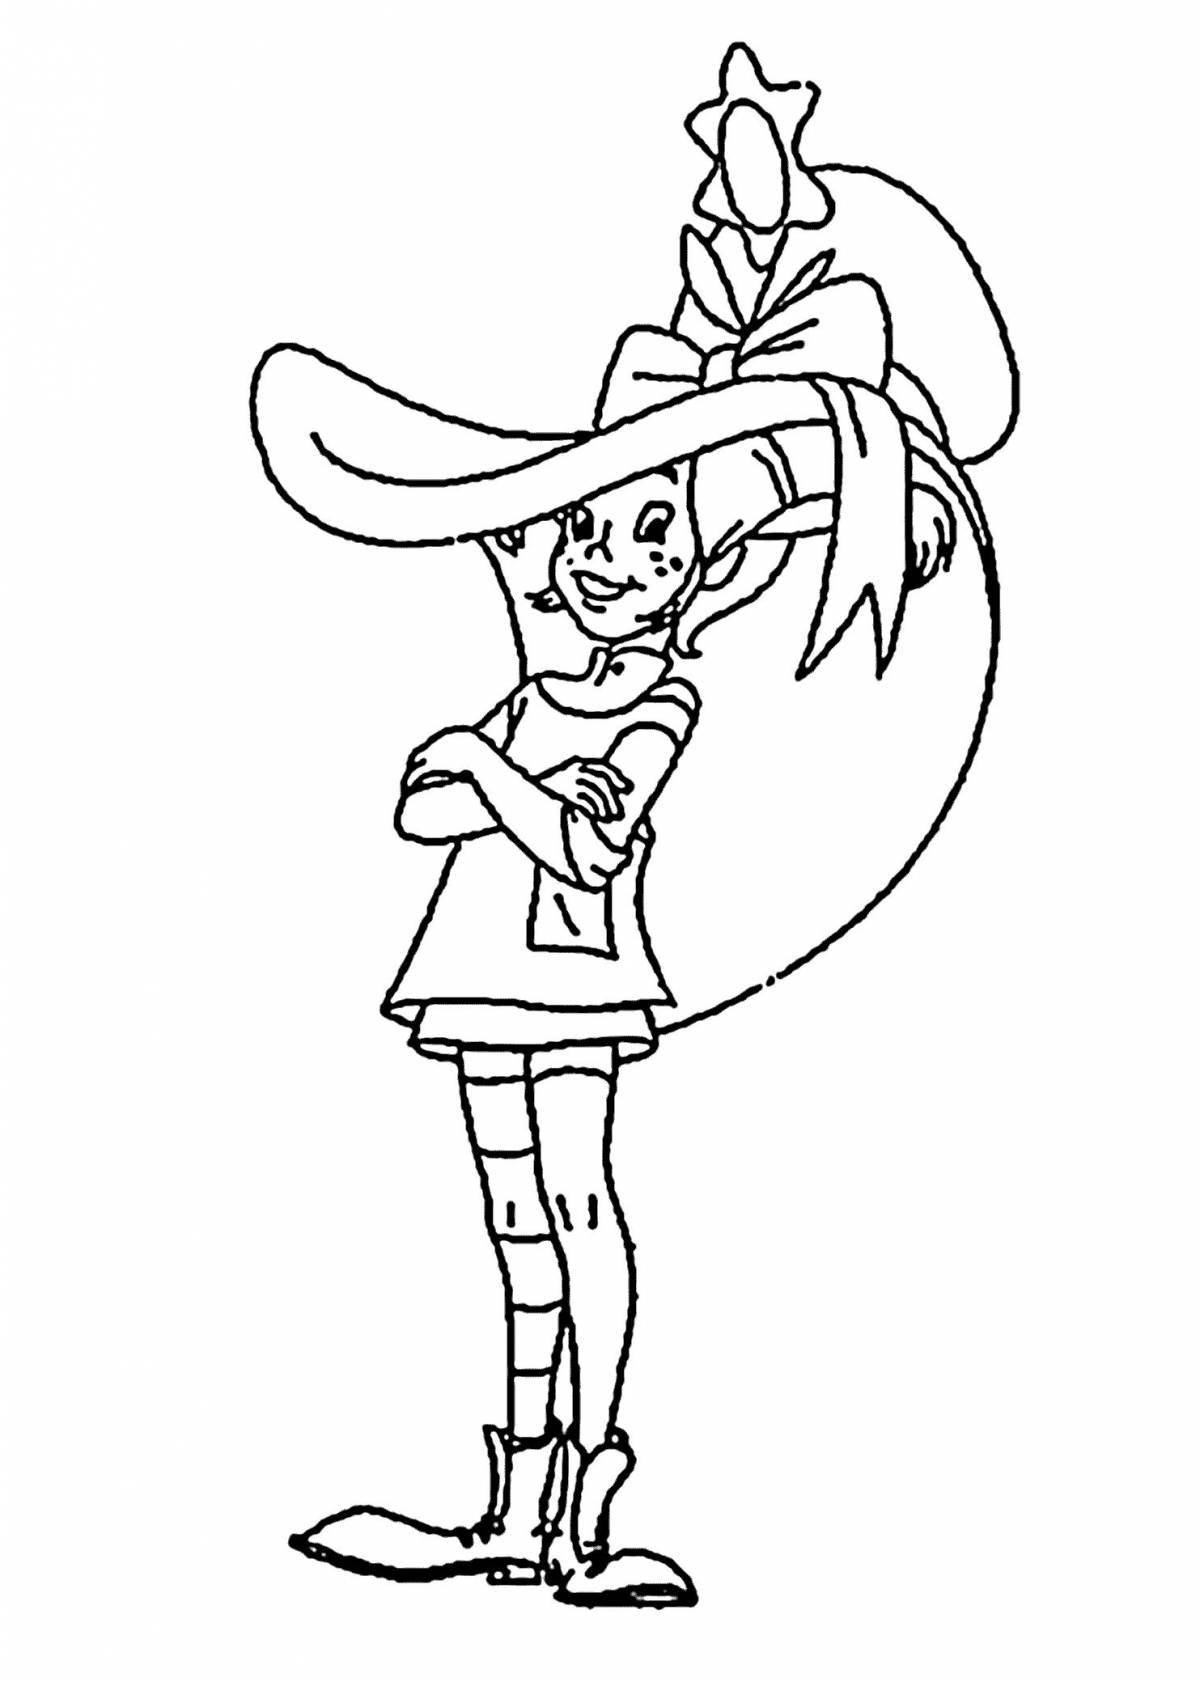 Peppy's adorable coloring page